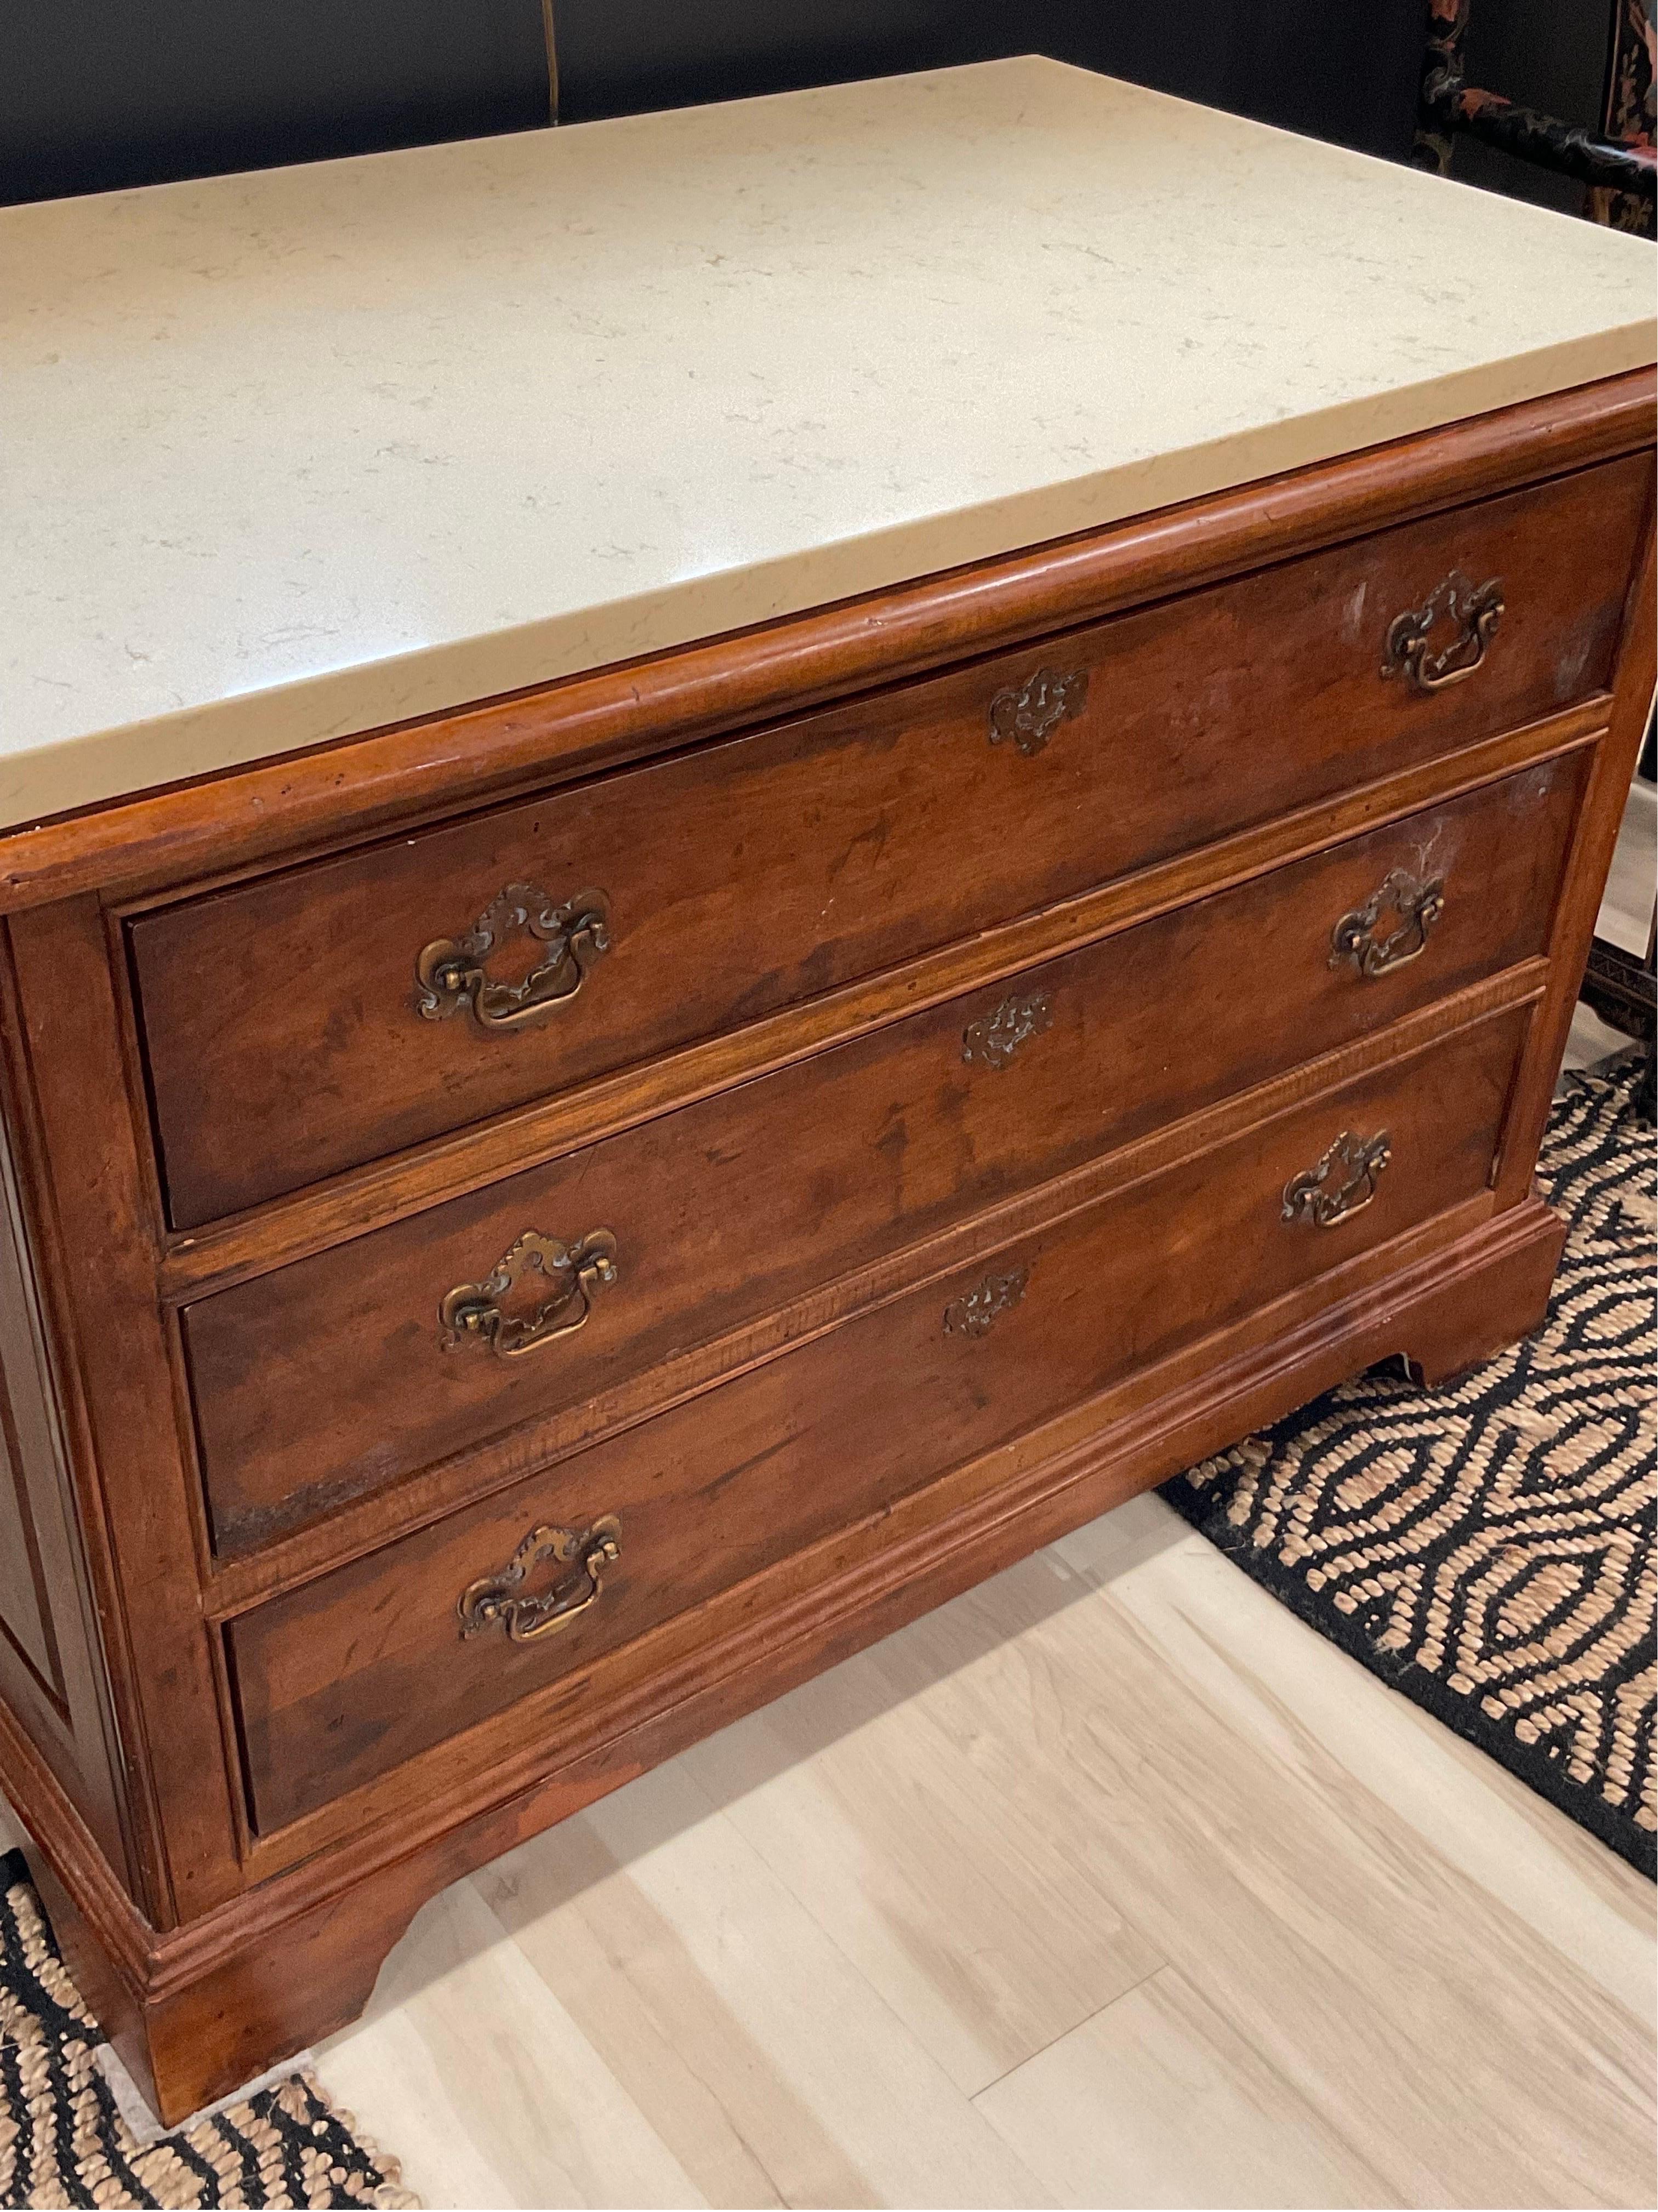 1 of 2 Monumental Chests of Drawers from Century Furniture. Distressed finish, beautiful hardware and cream stone tops. These are huge and have a strong European rustic feel. Italian farmhouse. $6800 each as new in the 1980's


Condition